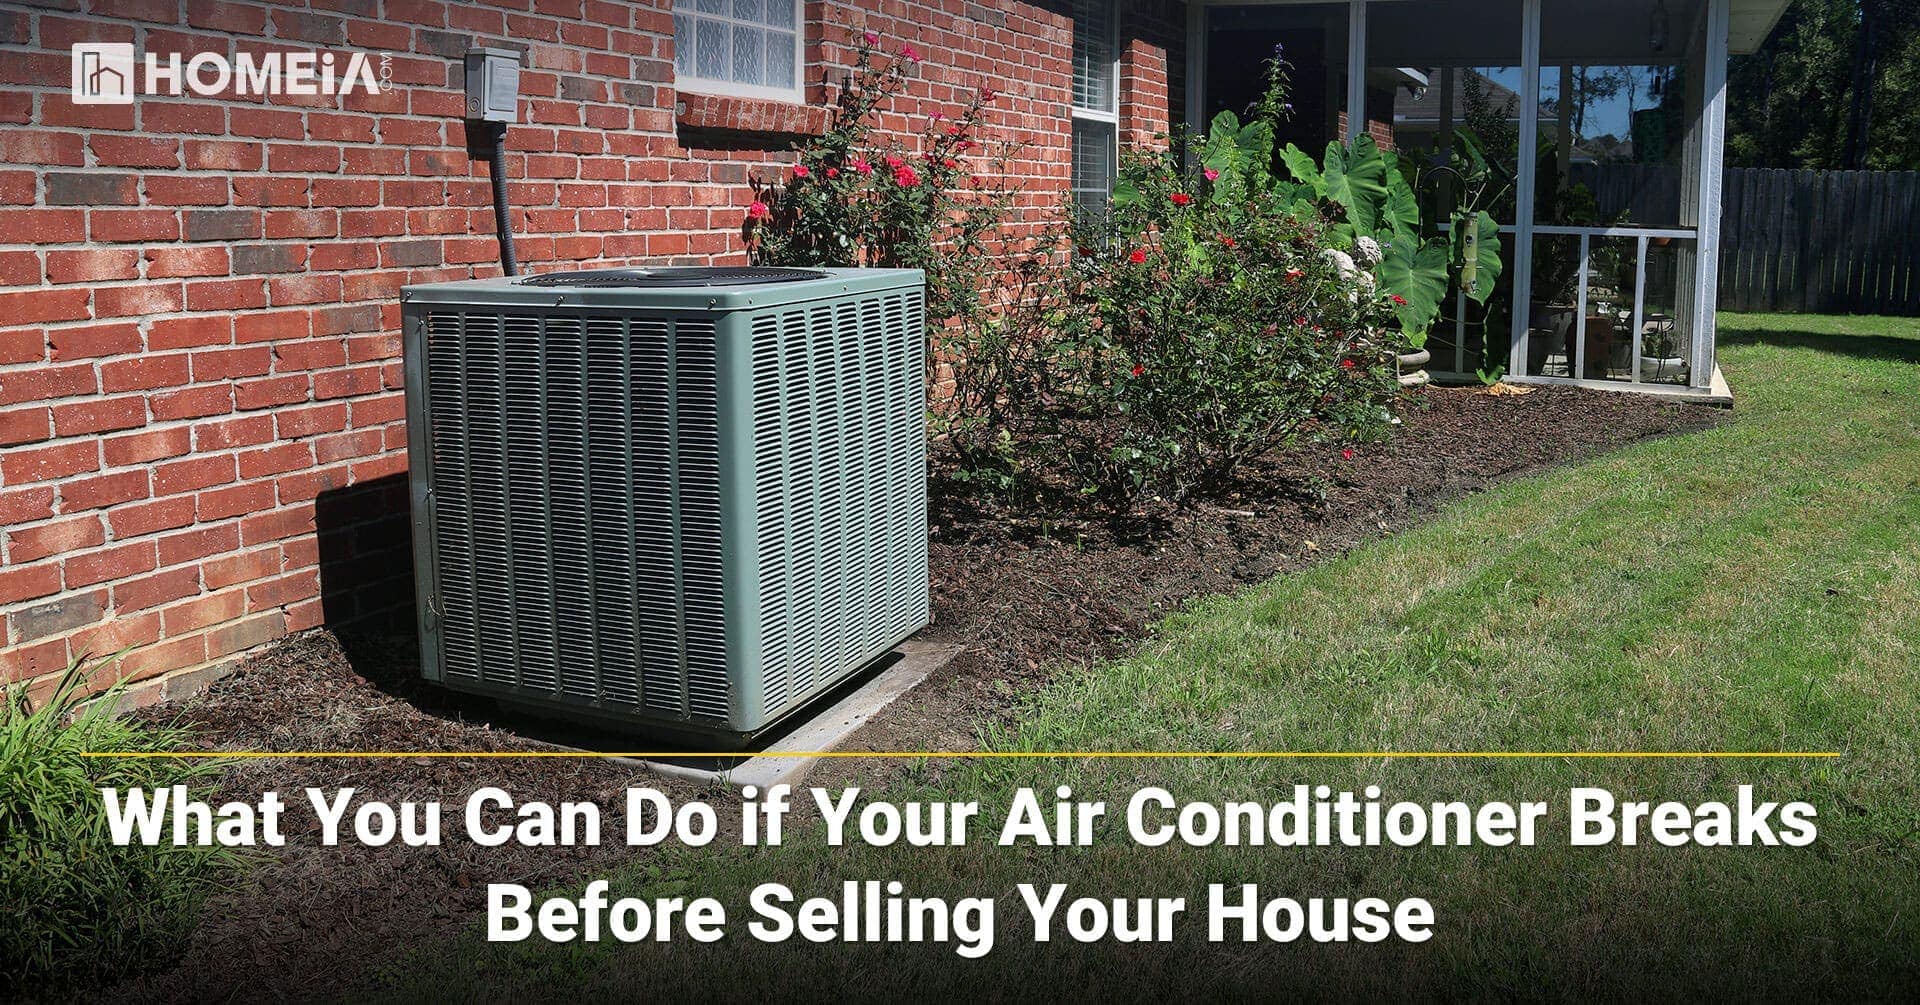 What You Can Do if Your Air Conditioner Breaks Before Selling Your House